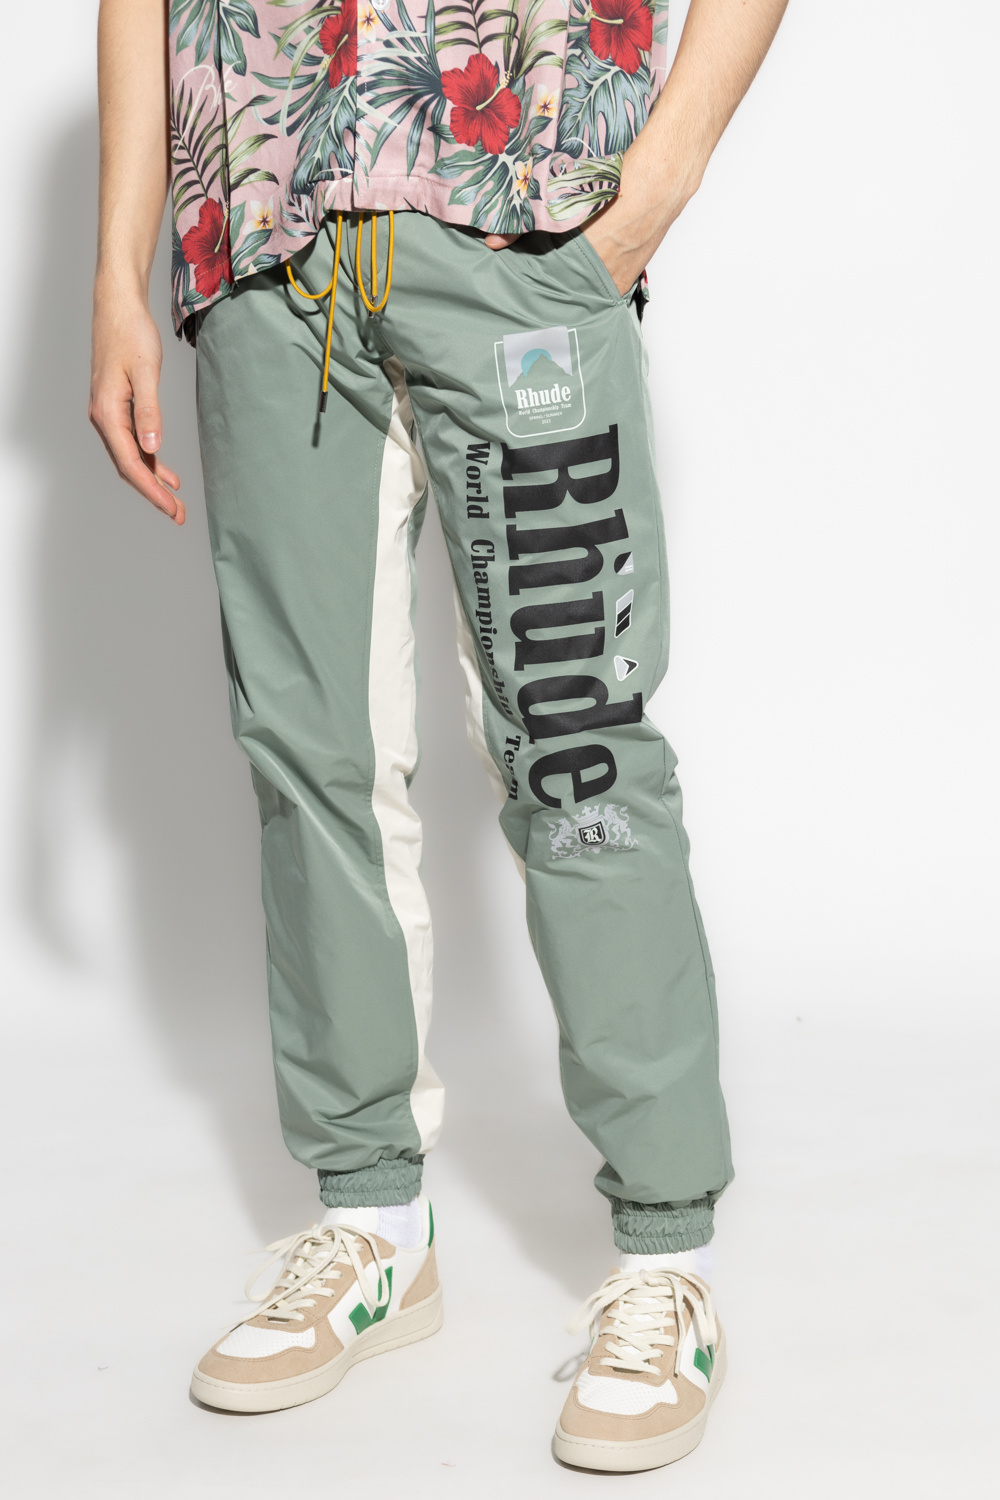 Rhude Goth trousers with logo